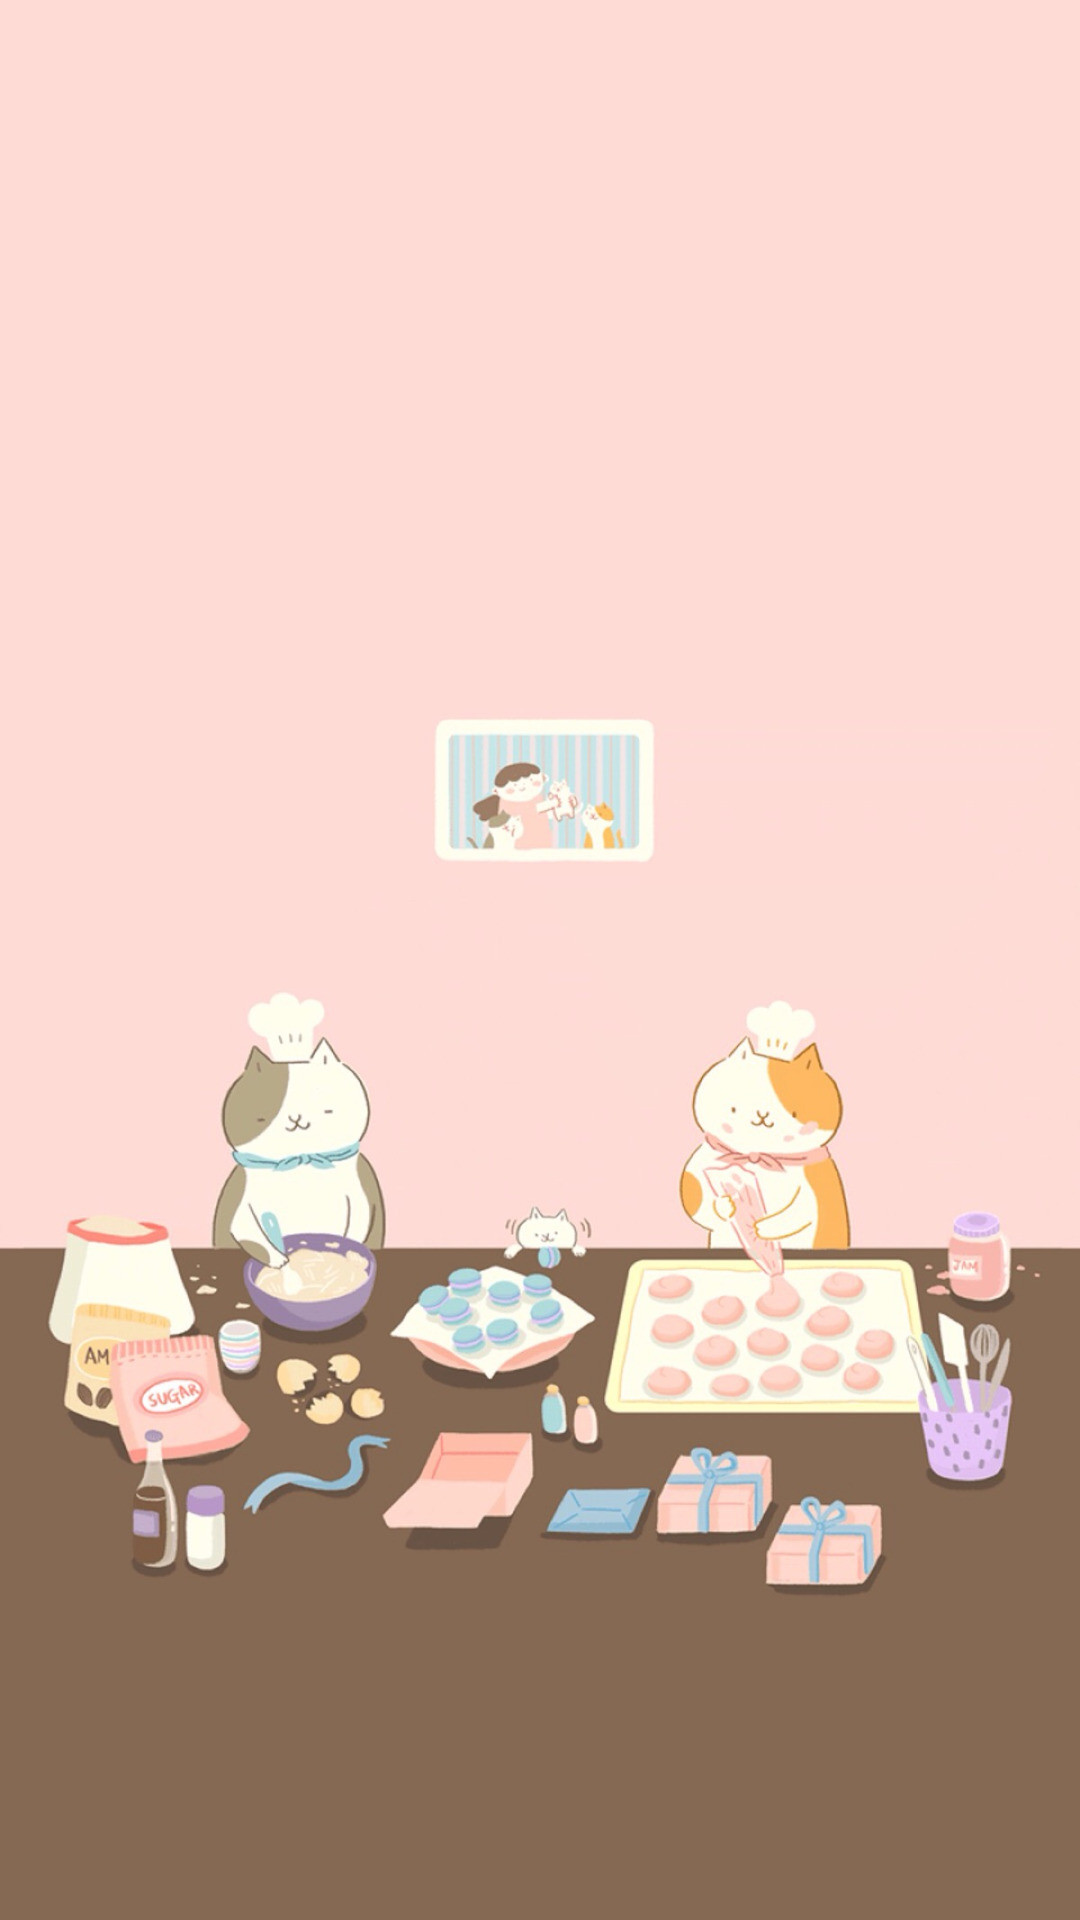 1080x1920 Tap to see more Neko Atsume the cat wallpapers, backgrounds, fondos for  iPhone, & Android!